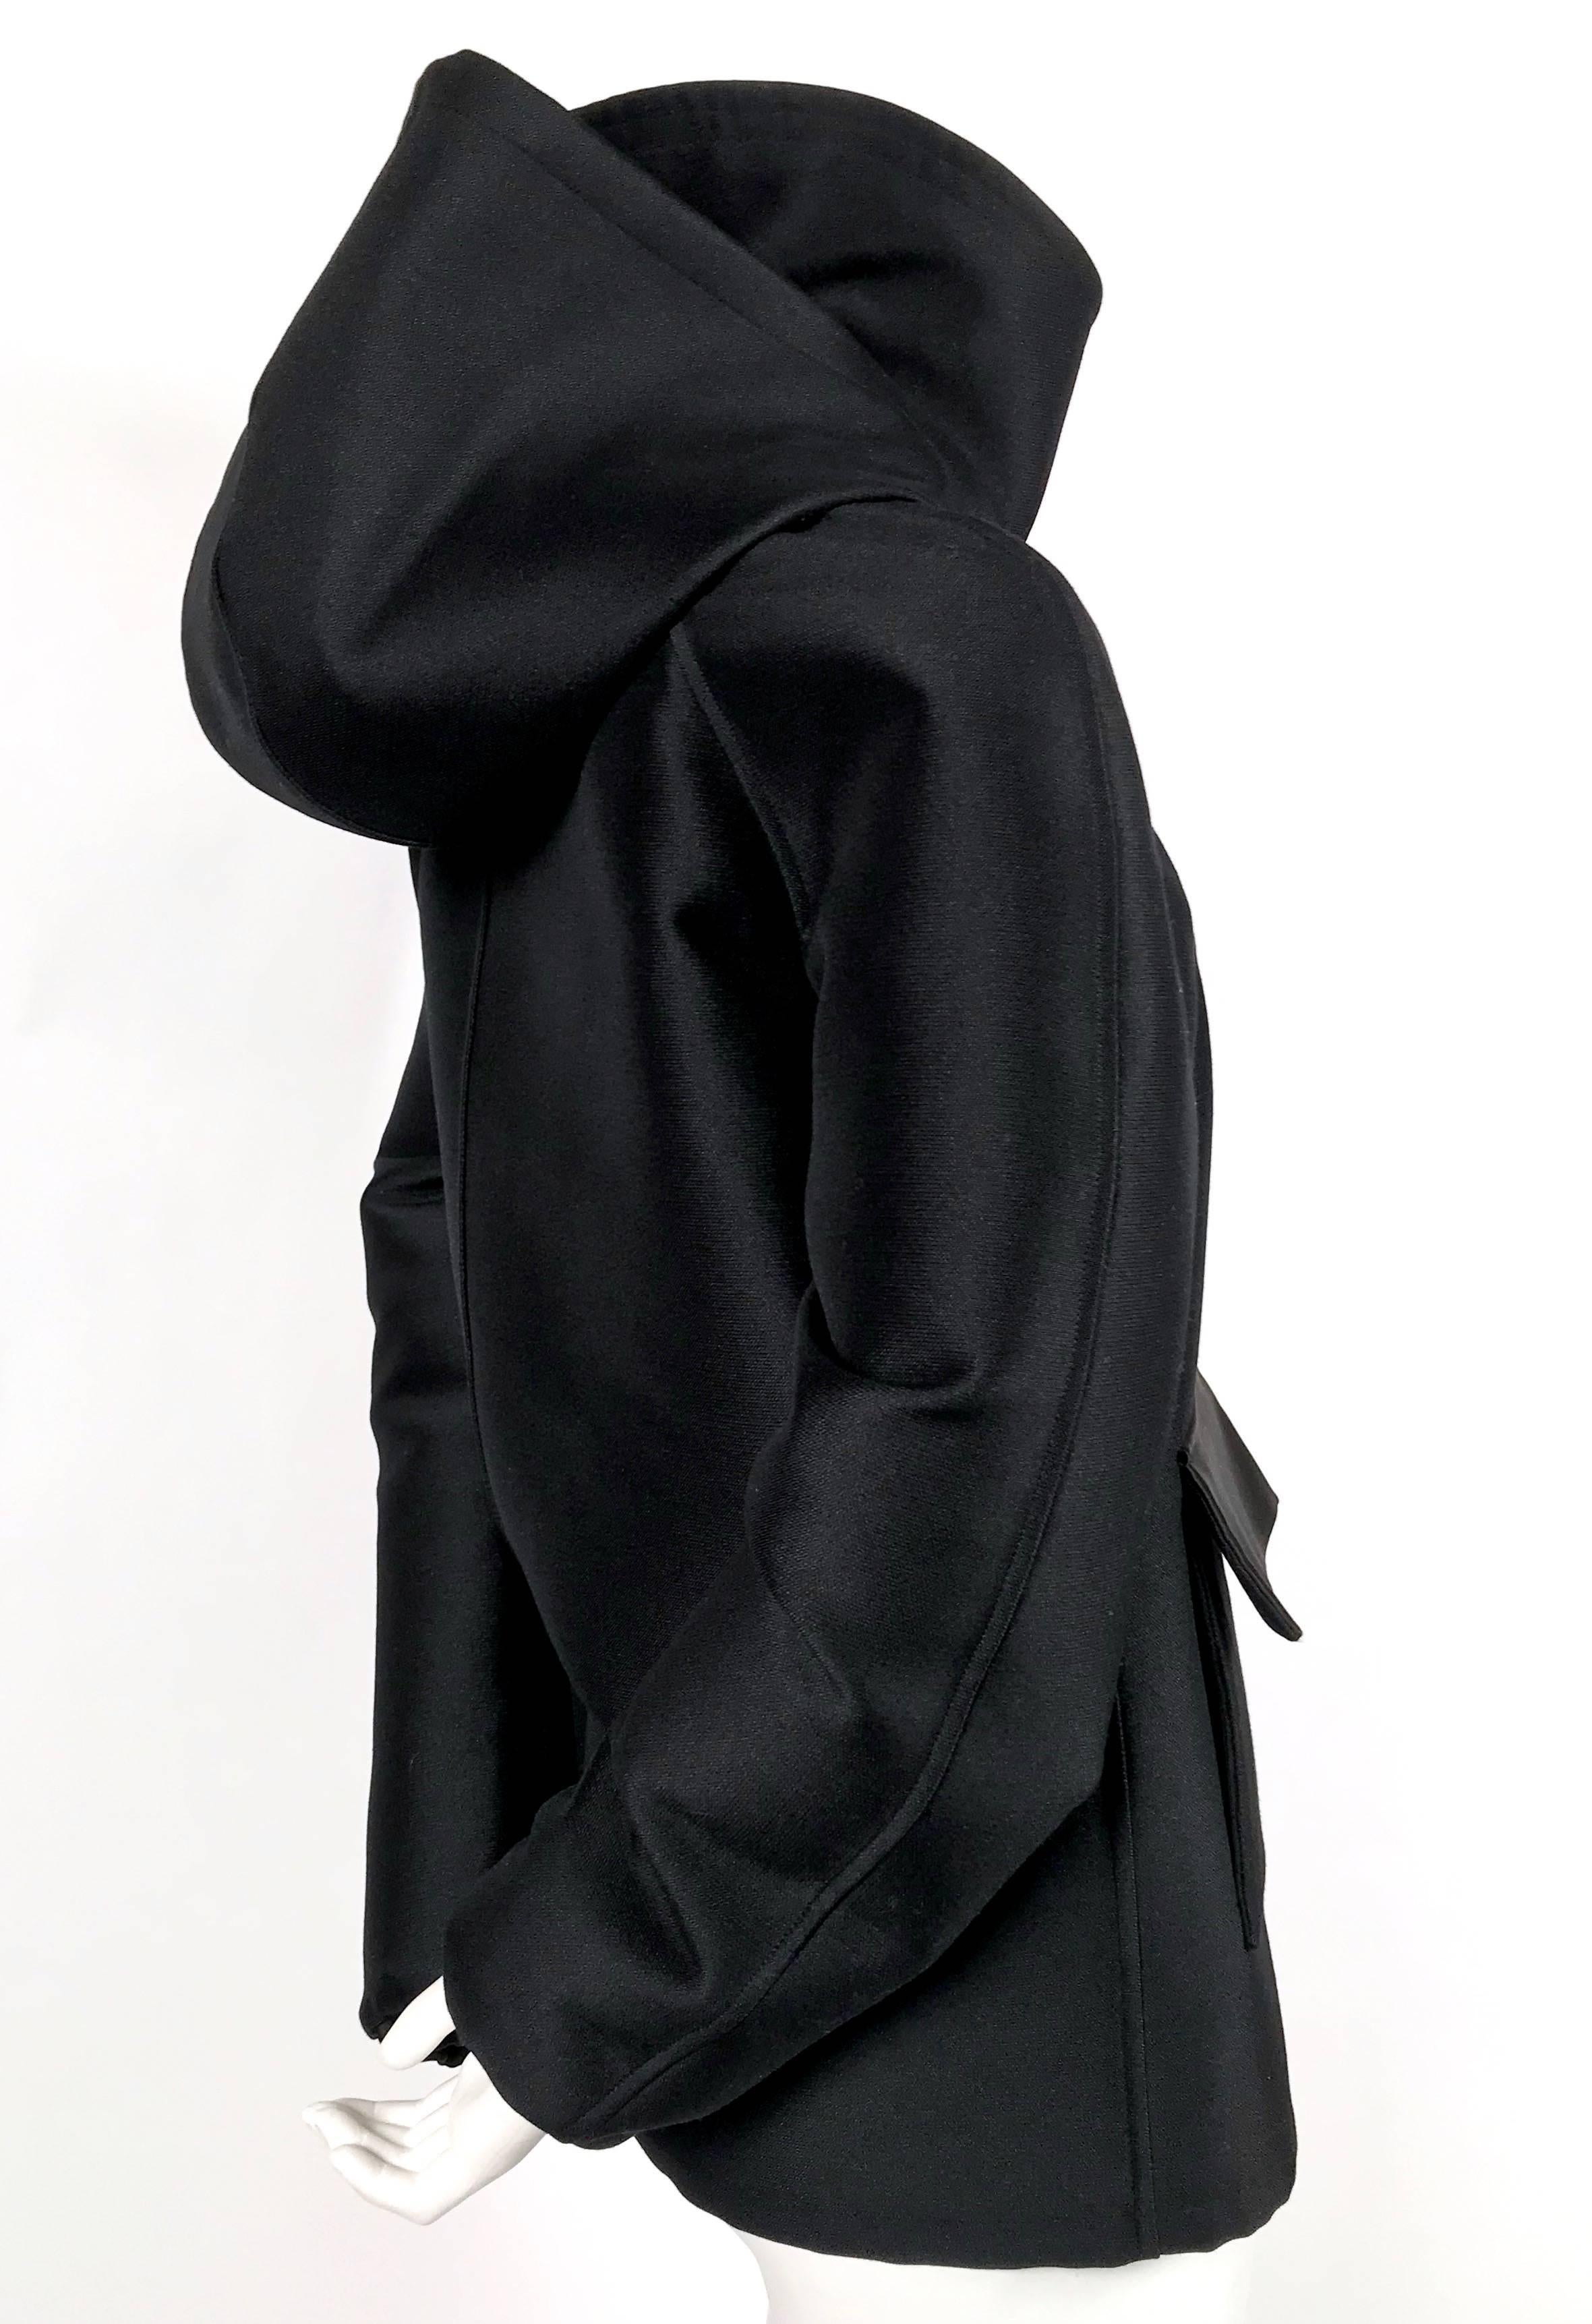 Black CELINE by PHOEBE PHILO black hooded jacket with satin accents